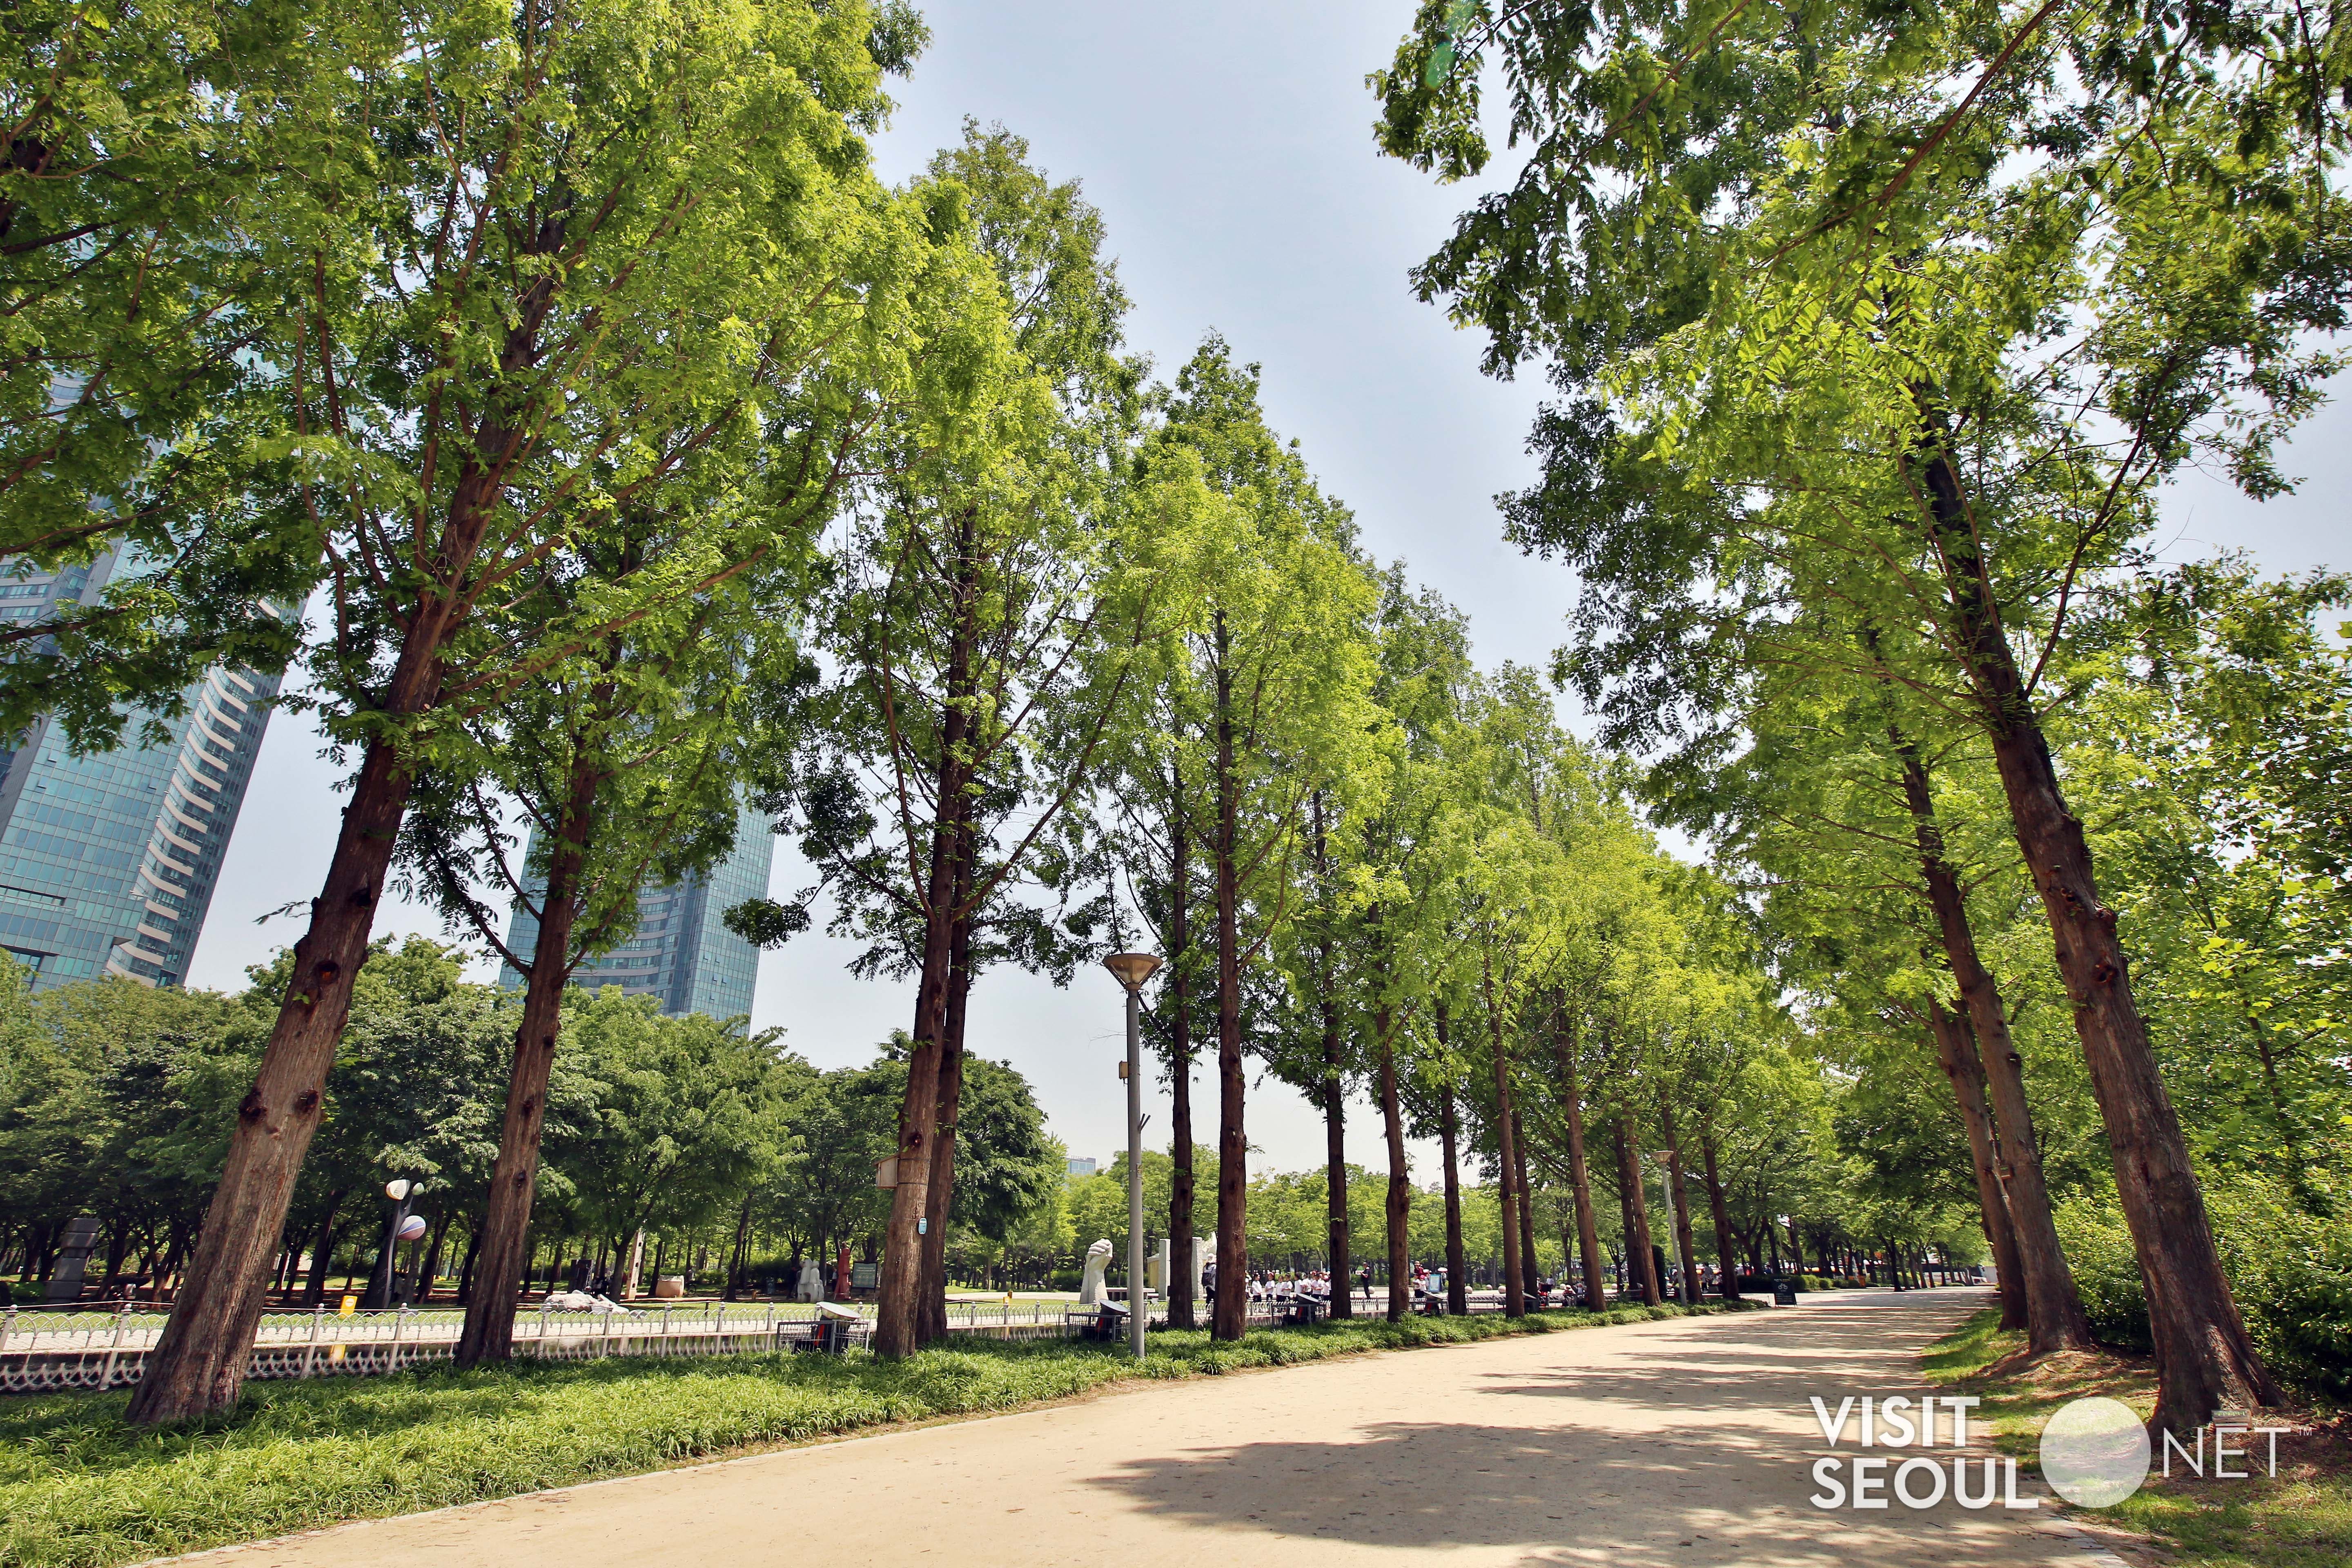 Seoul Forest5 : Promenade of Seoul Forest with large trees on either side
